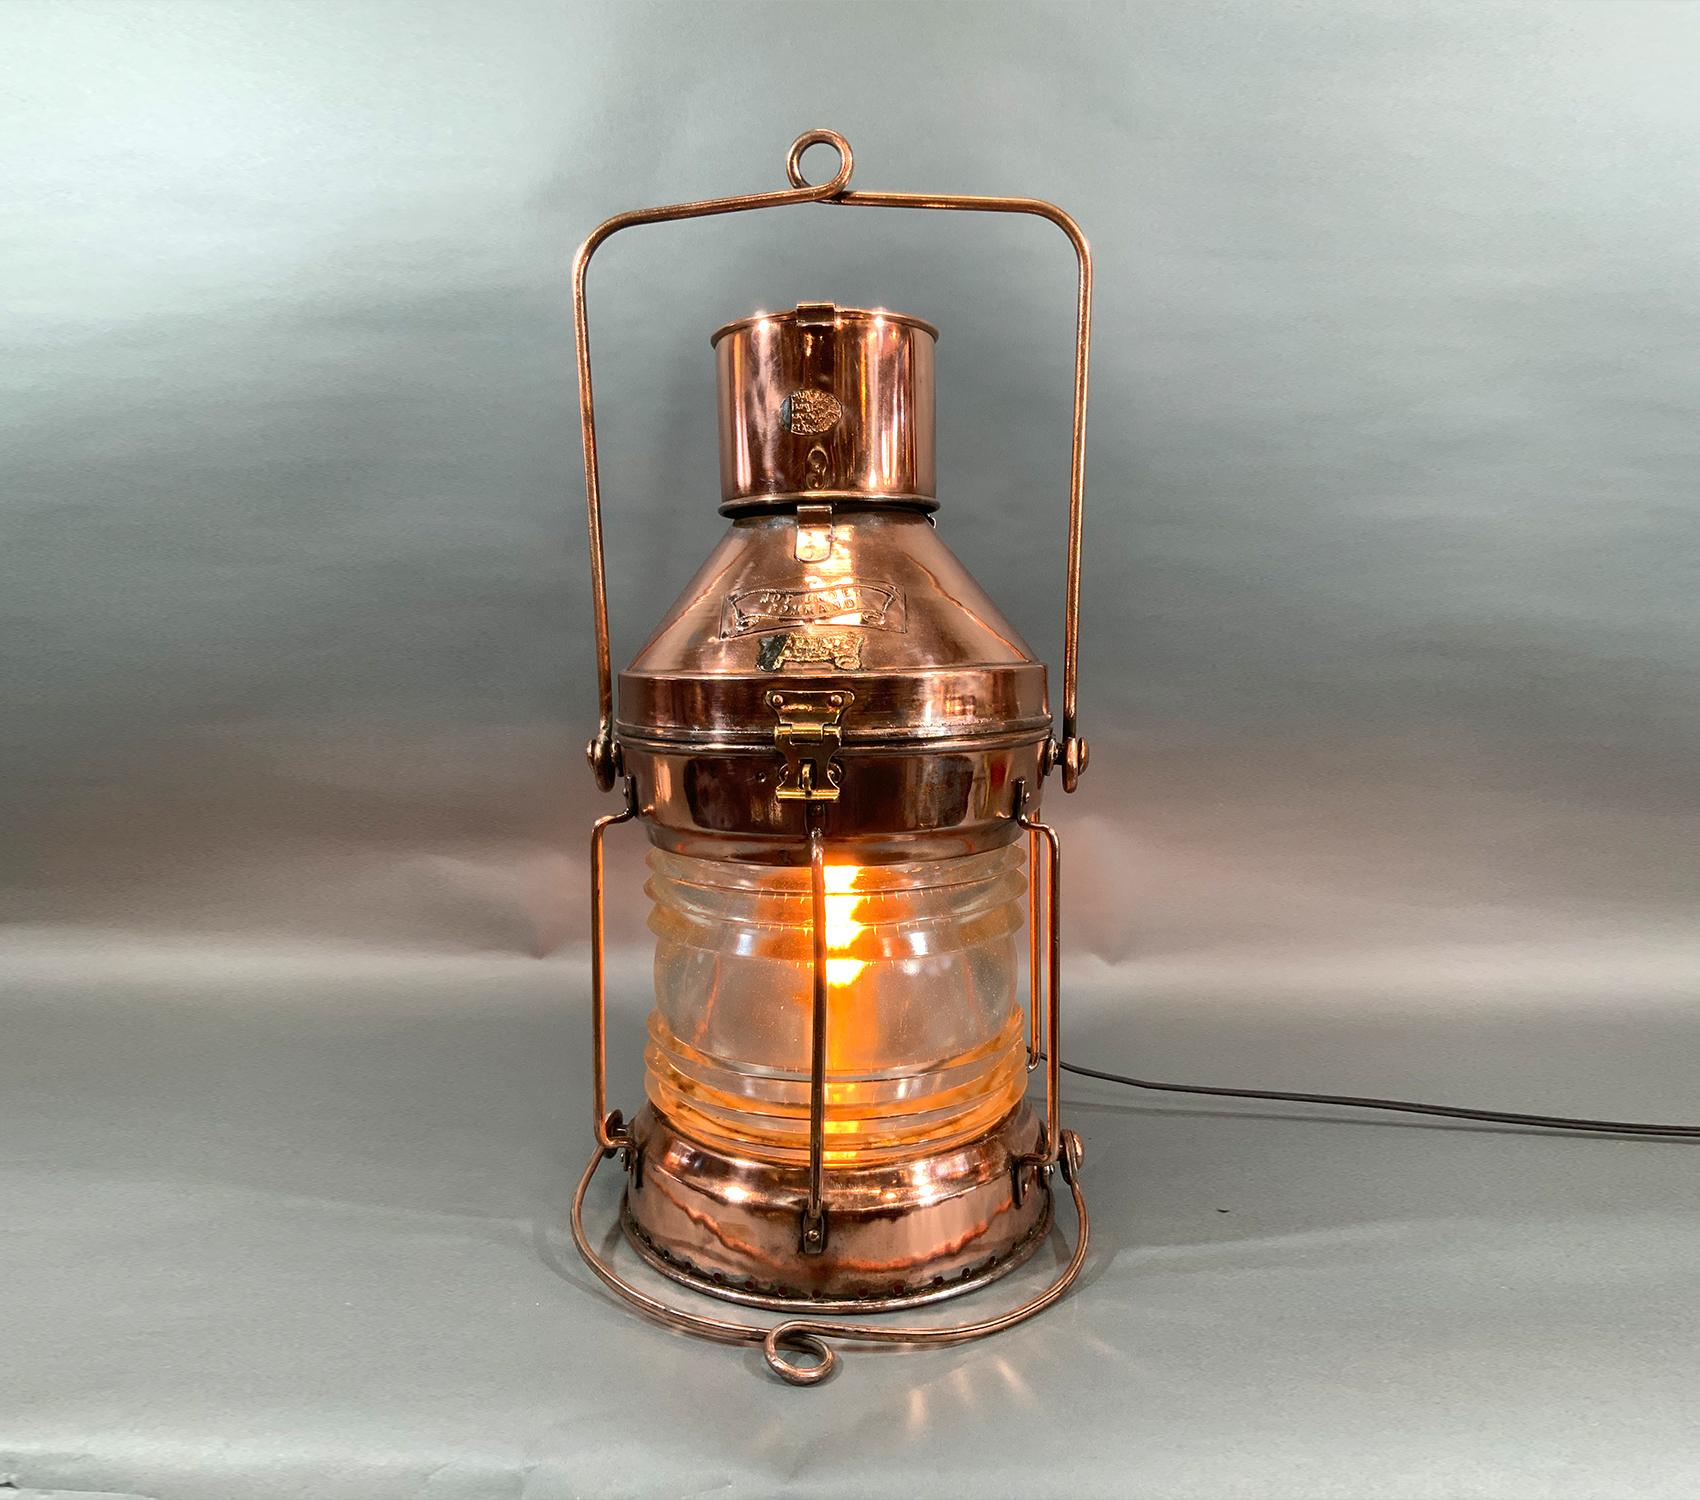 Copper and brass ships “not under command” lantern with clear Fresnel glass lens. Fitted with brass badges. Copper hoisting handle. Polished and lacquered. Wired for home use. Remnants of a makers badge from R.C. Murray.

Weight: 20 LBS
Overall